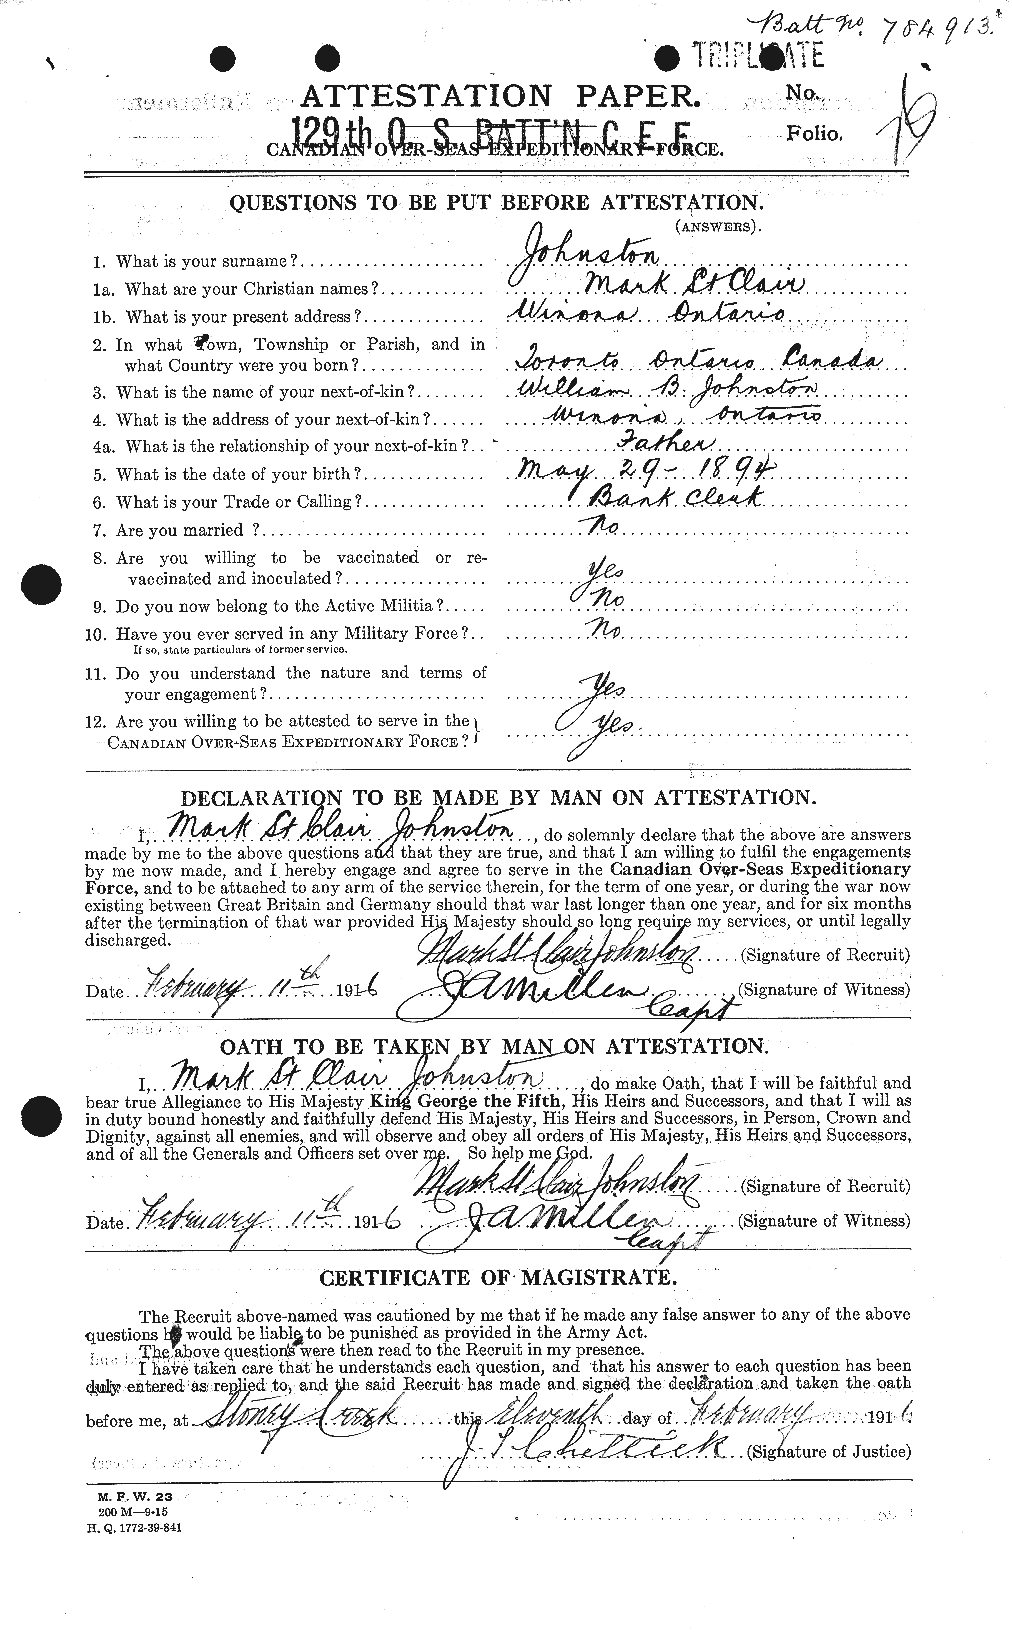 Personnel Records of the First World War - CEF 422970a